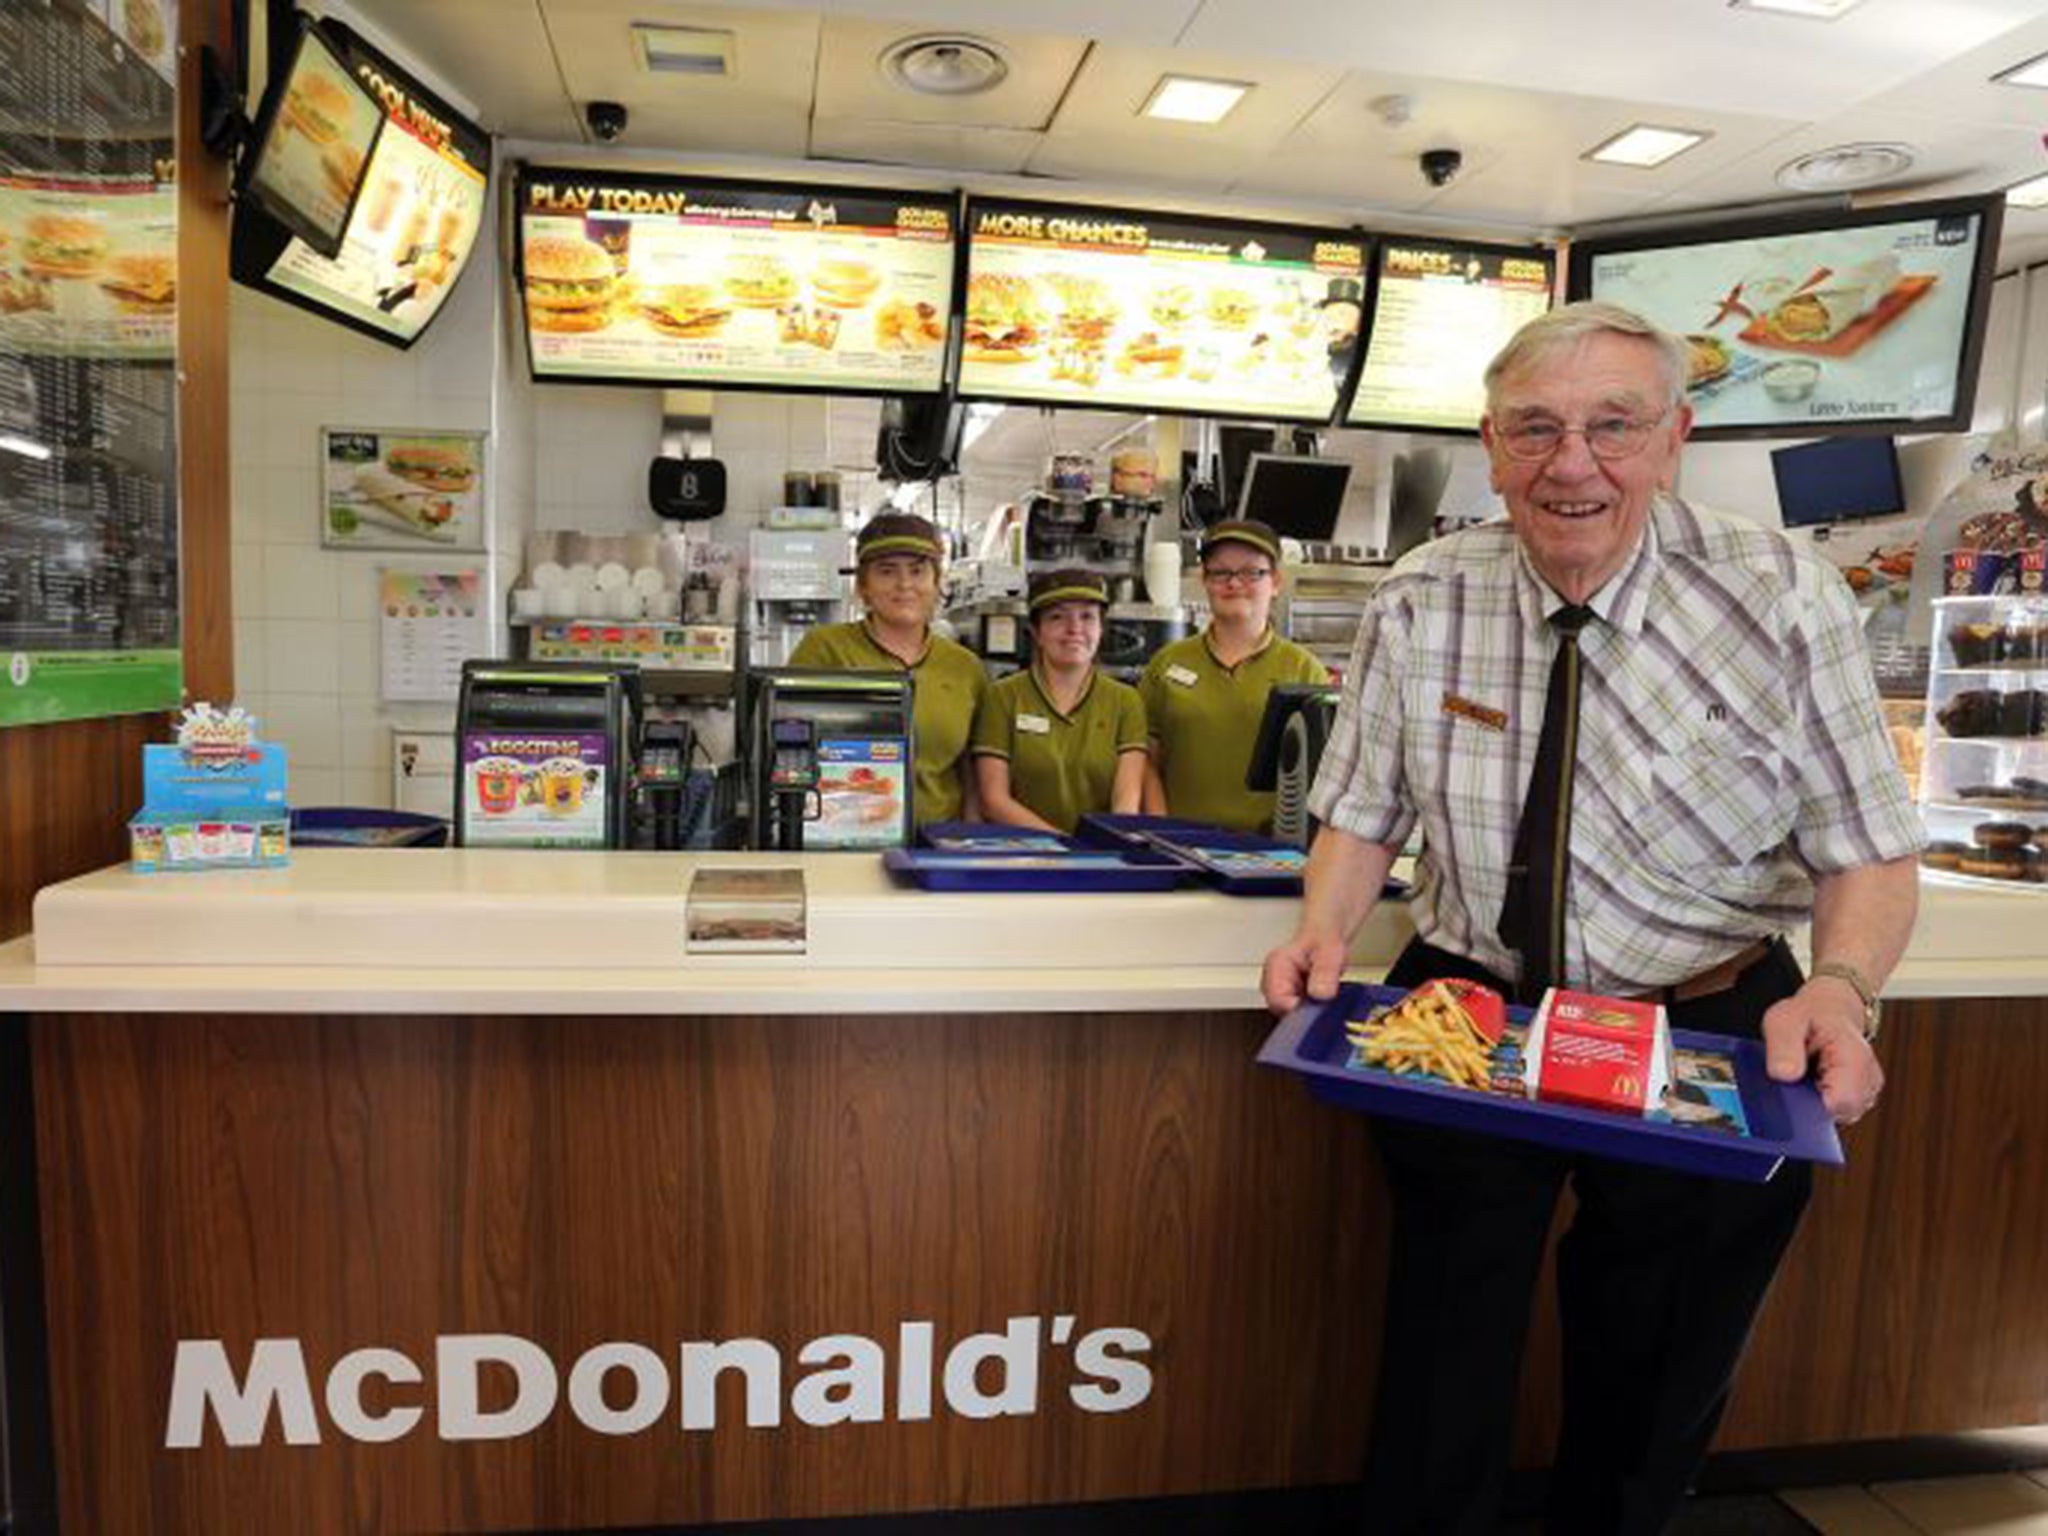 Bill Dudley, 90-year-old McDonald’s worker